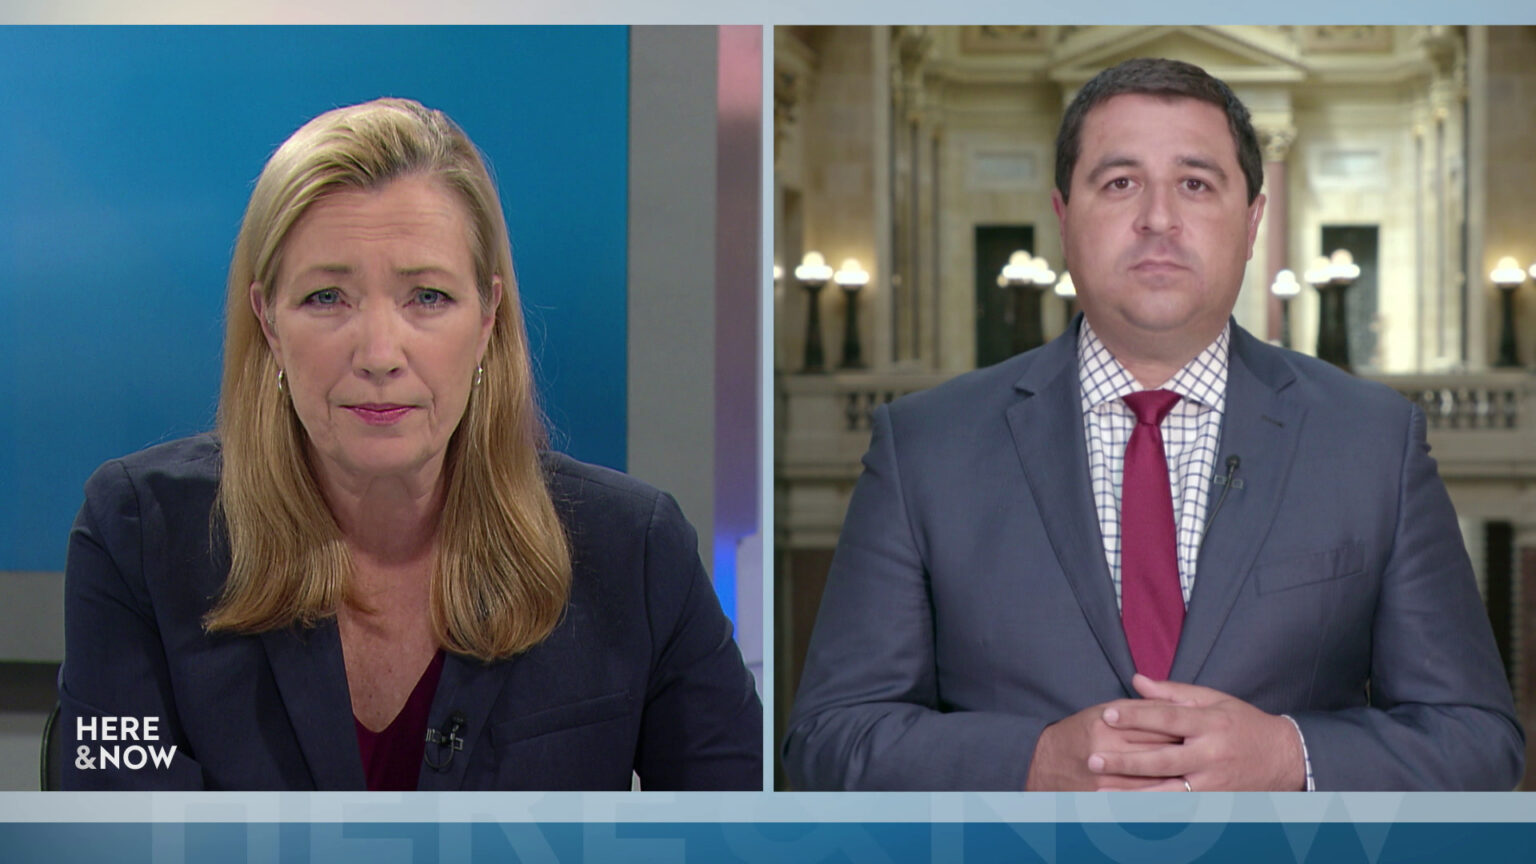 A split screen shows Frederica Freyberg and Josh Kaul in different locations.